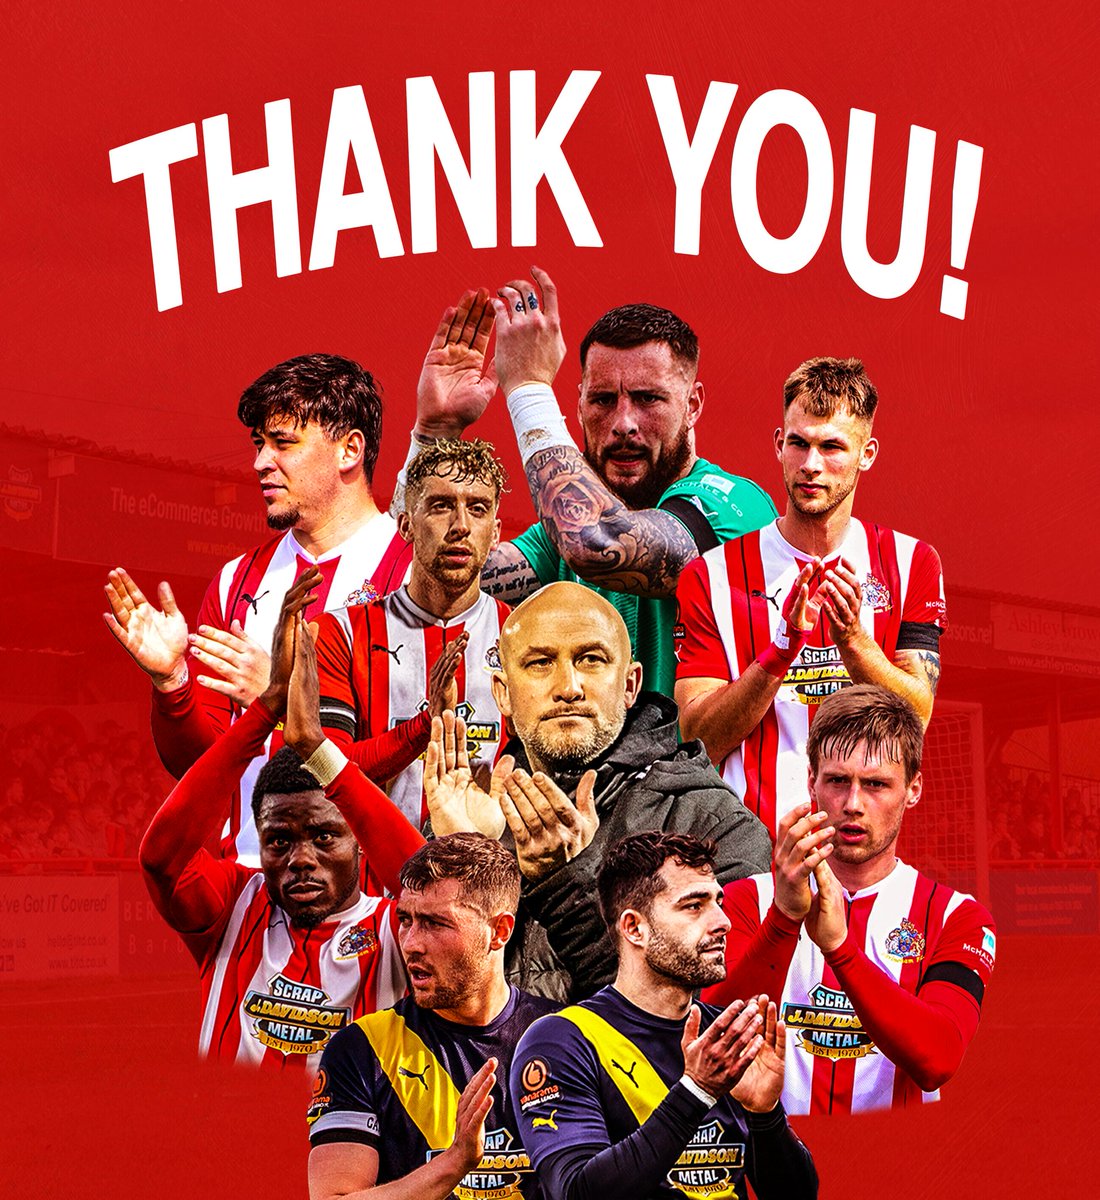 To everyone who followed us up and down the country, to everyone who made sacrifices in the name of Alty FC, and to everyone who backed us through thick and thin, we thank you from the bottom of our hearts ❤️ Today wasn't our day but mark our words... We. Will. Be. Back 💪